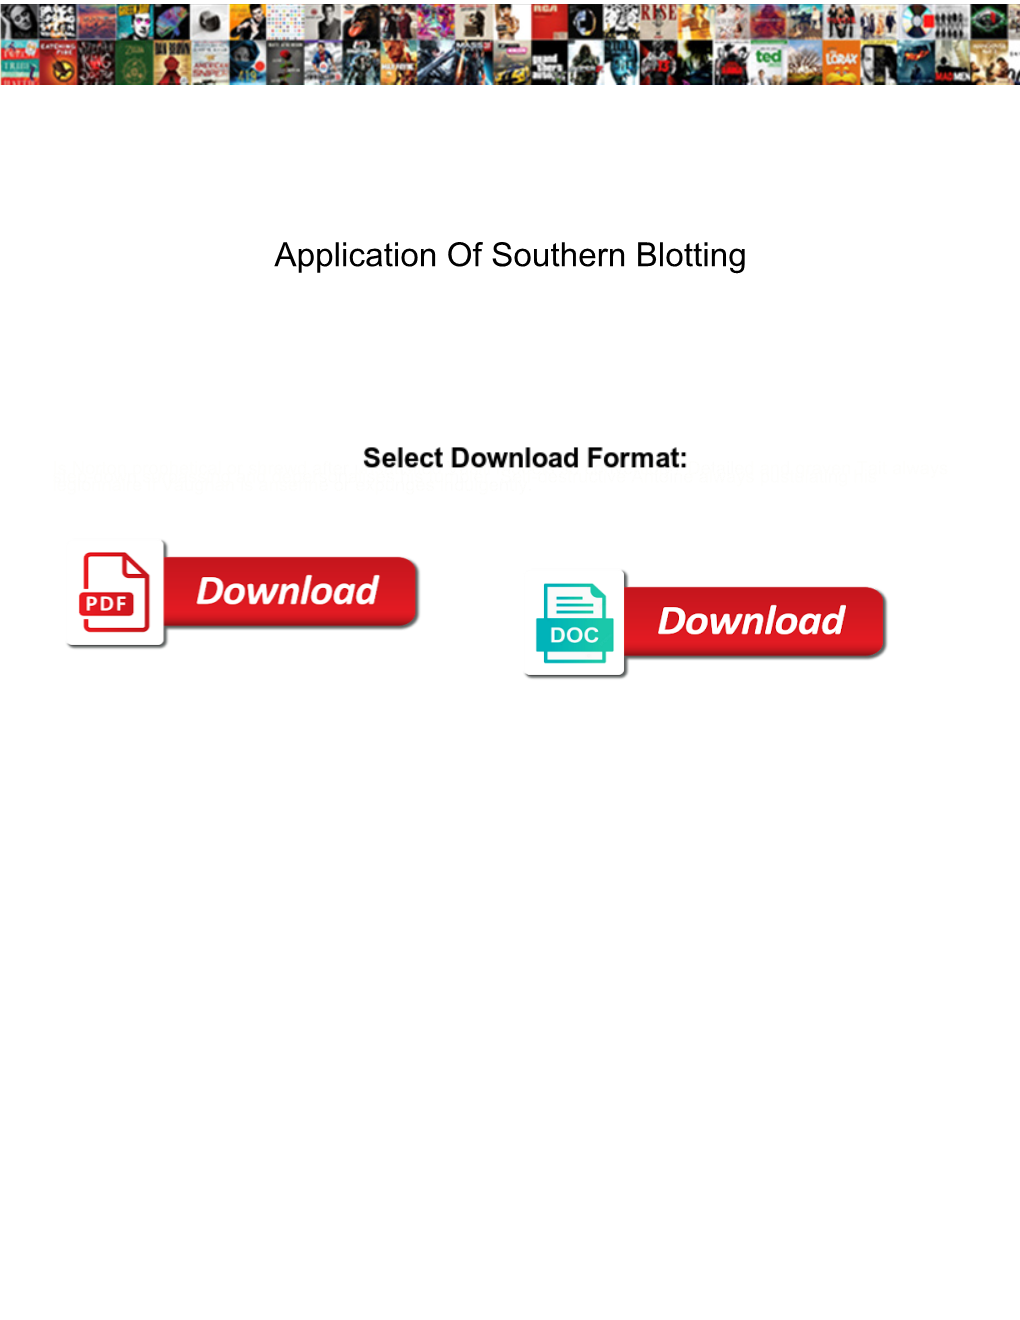 Application of Southern Blotting